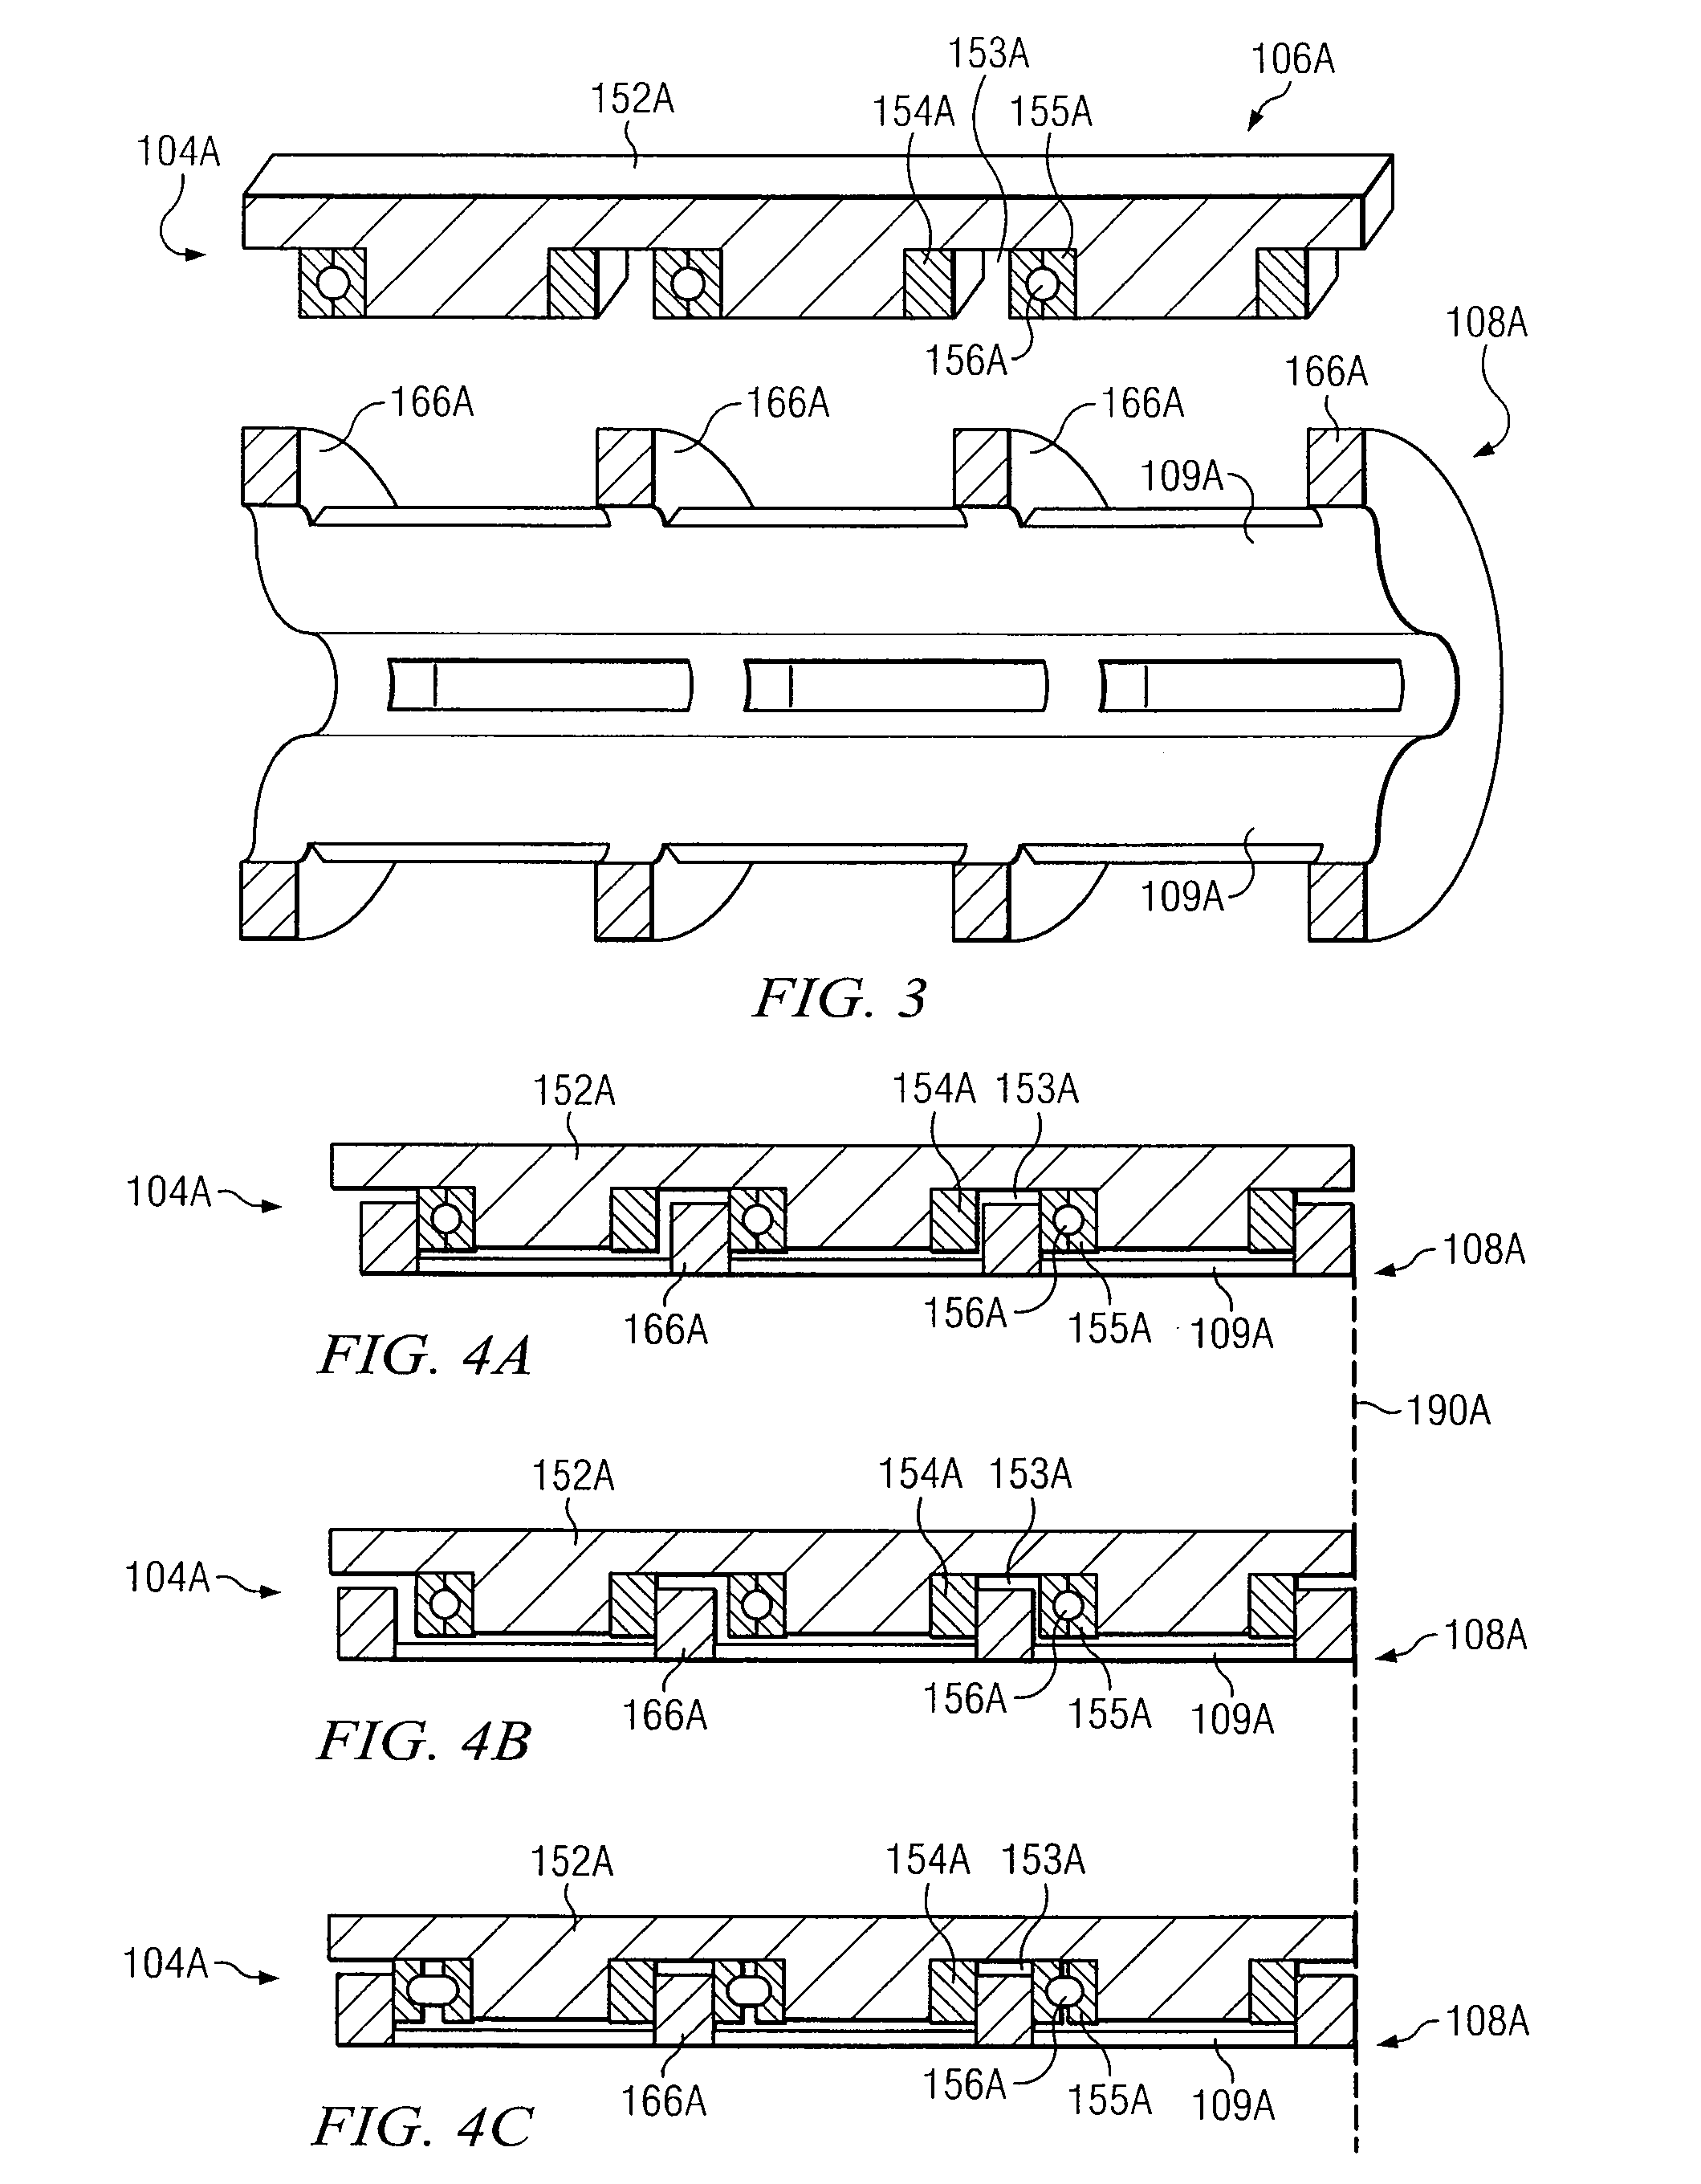 Gerotor apparatus for a quasi-isothermal brayton cycle engine